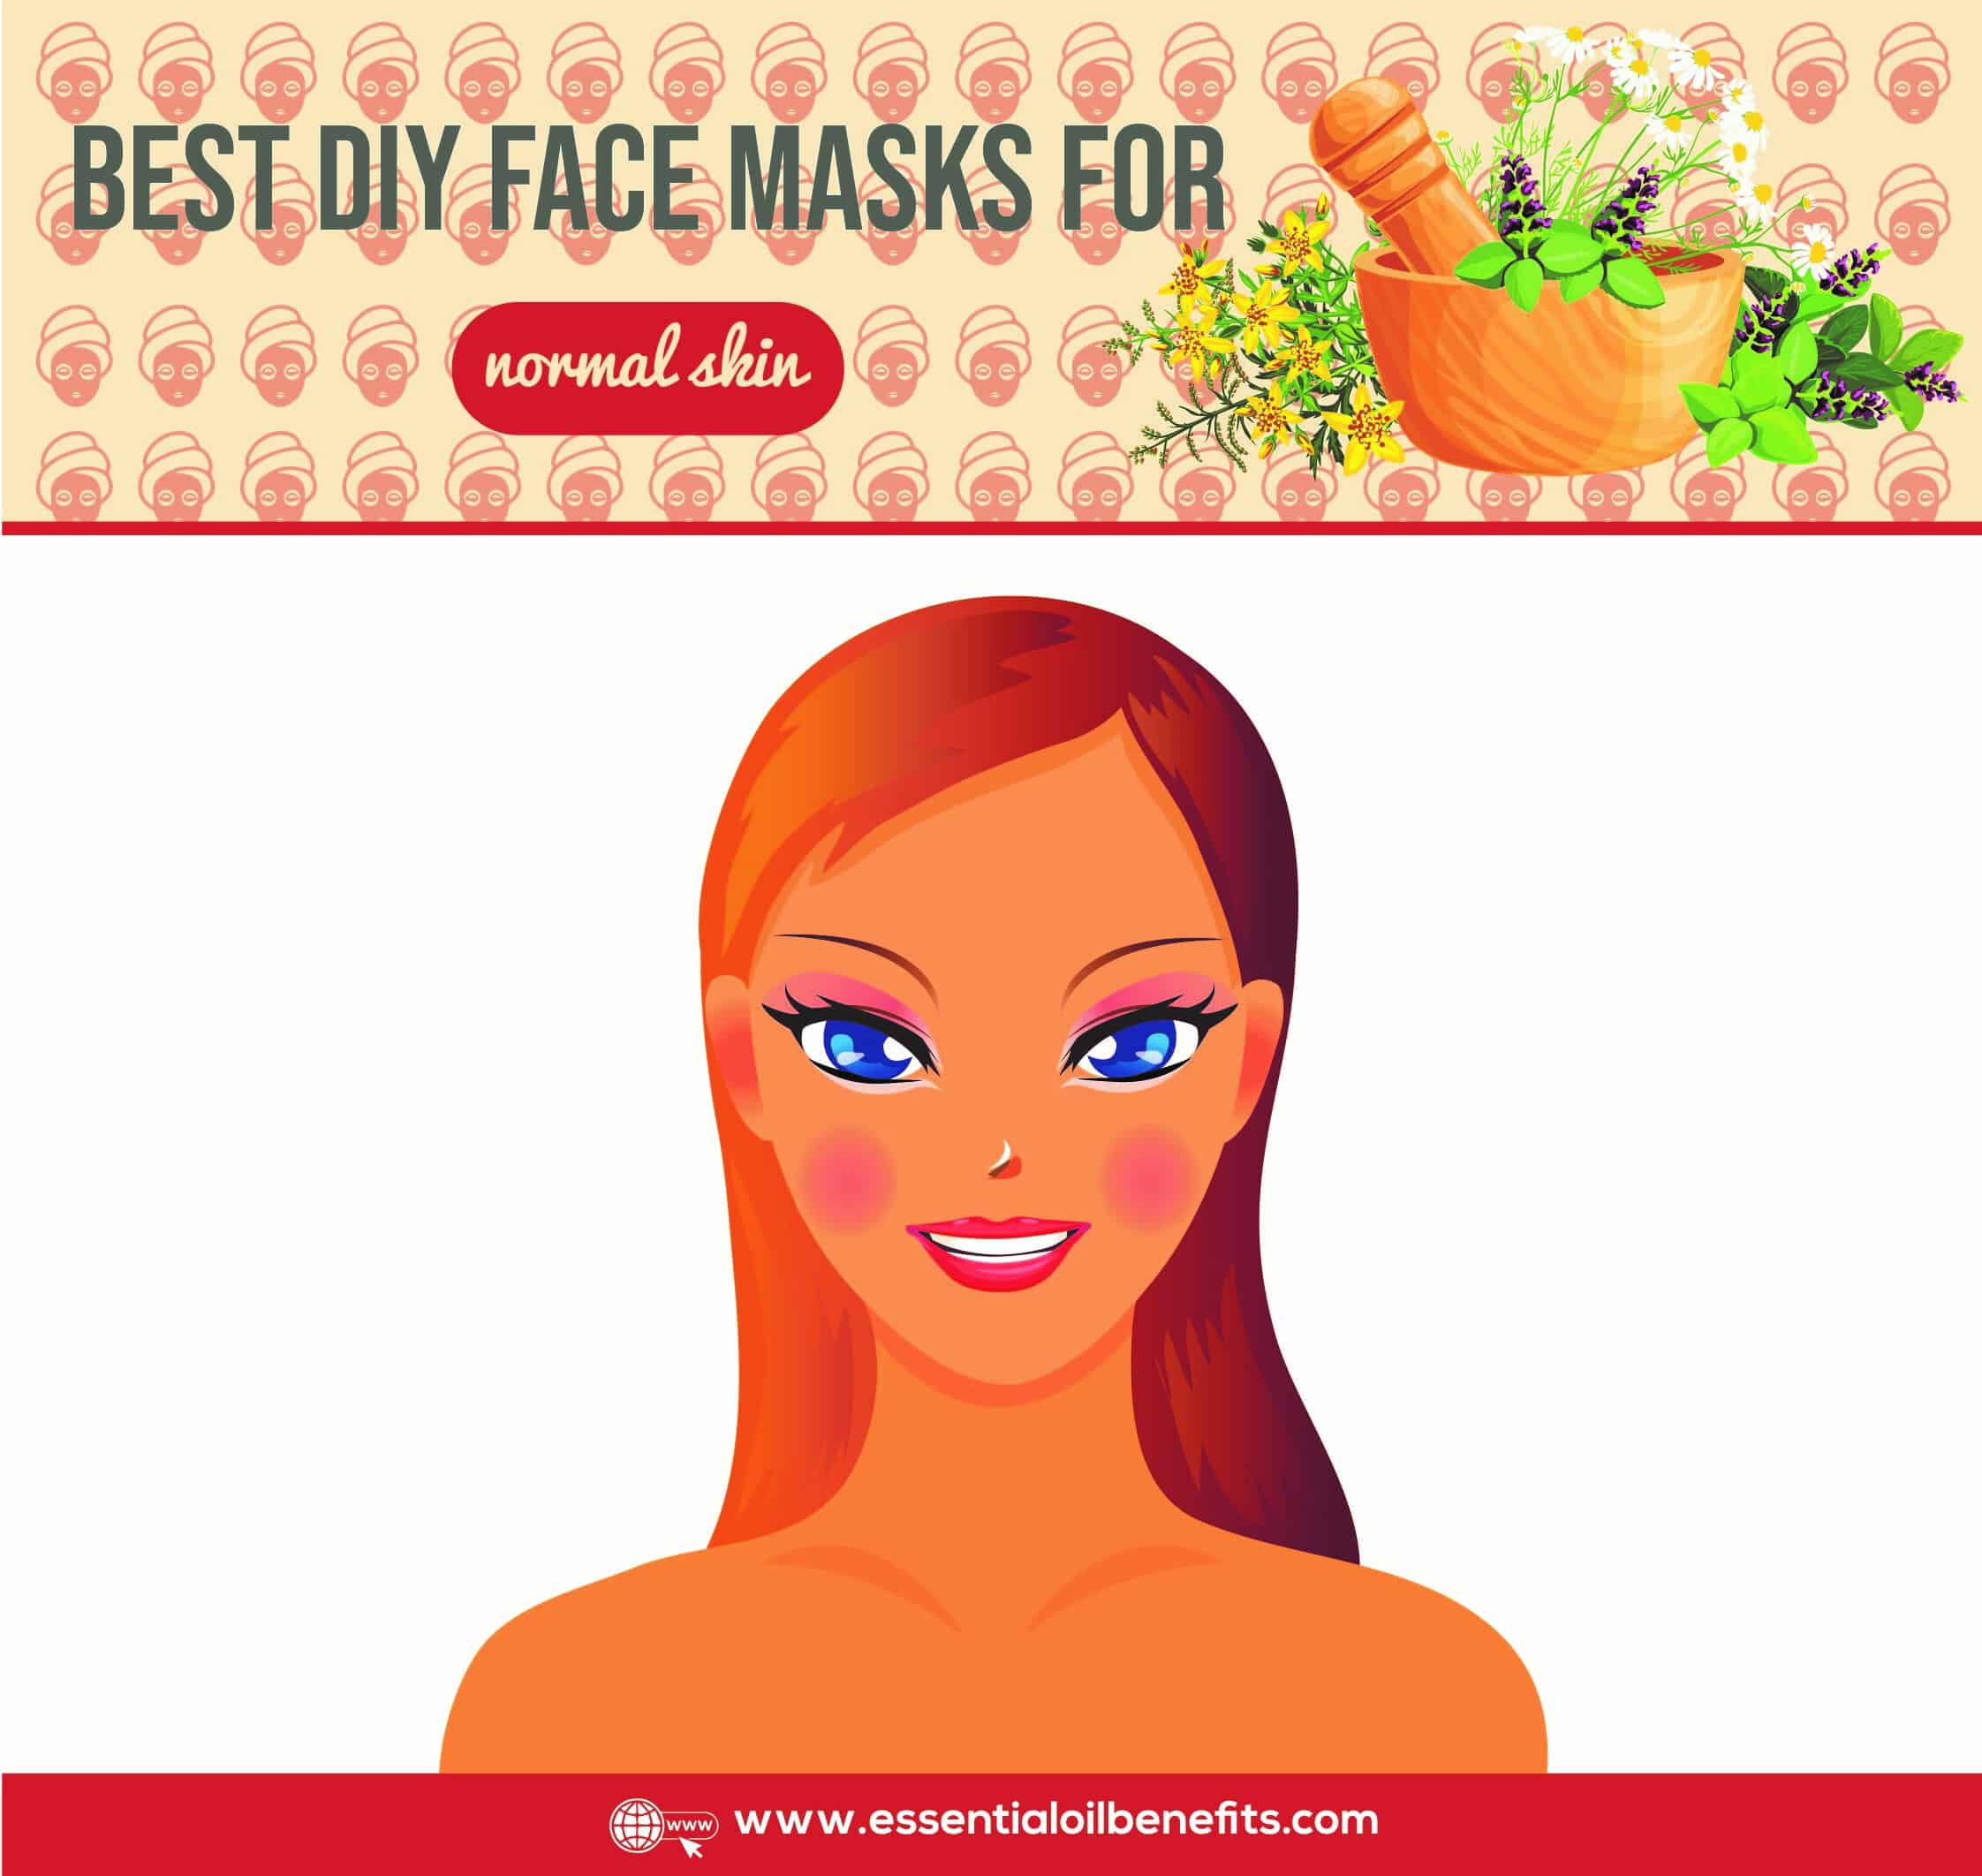 Best DIY Face Mask Recipes For All Skin Types (aging, dry, normal/sensitive, oily/combination, very dry skin) Essential Oil Benefits